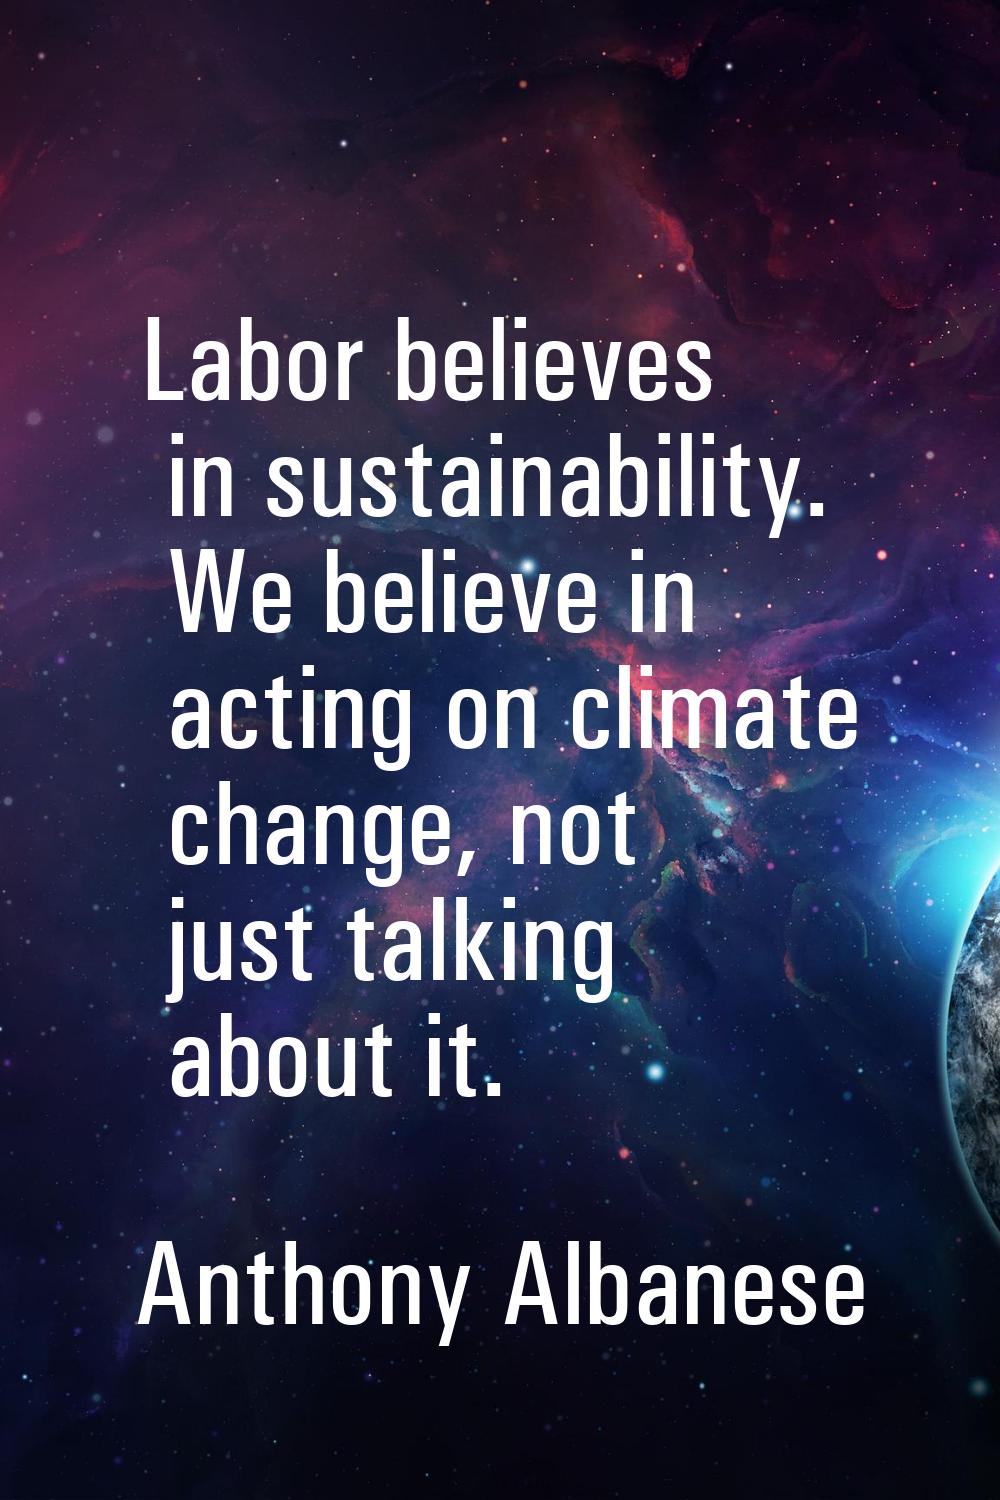 Labor believes in sustainability. We believe in acting on climate change, not just talking about it